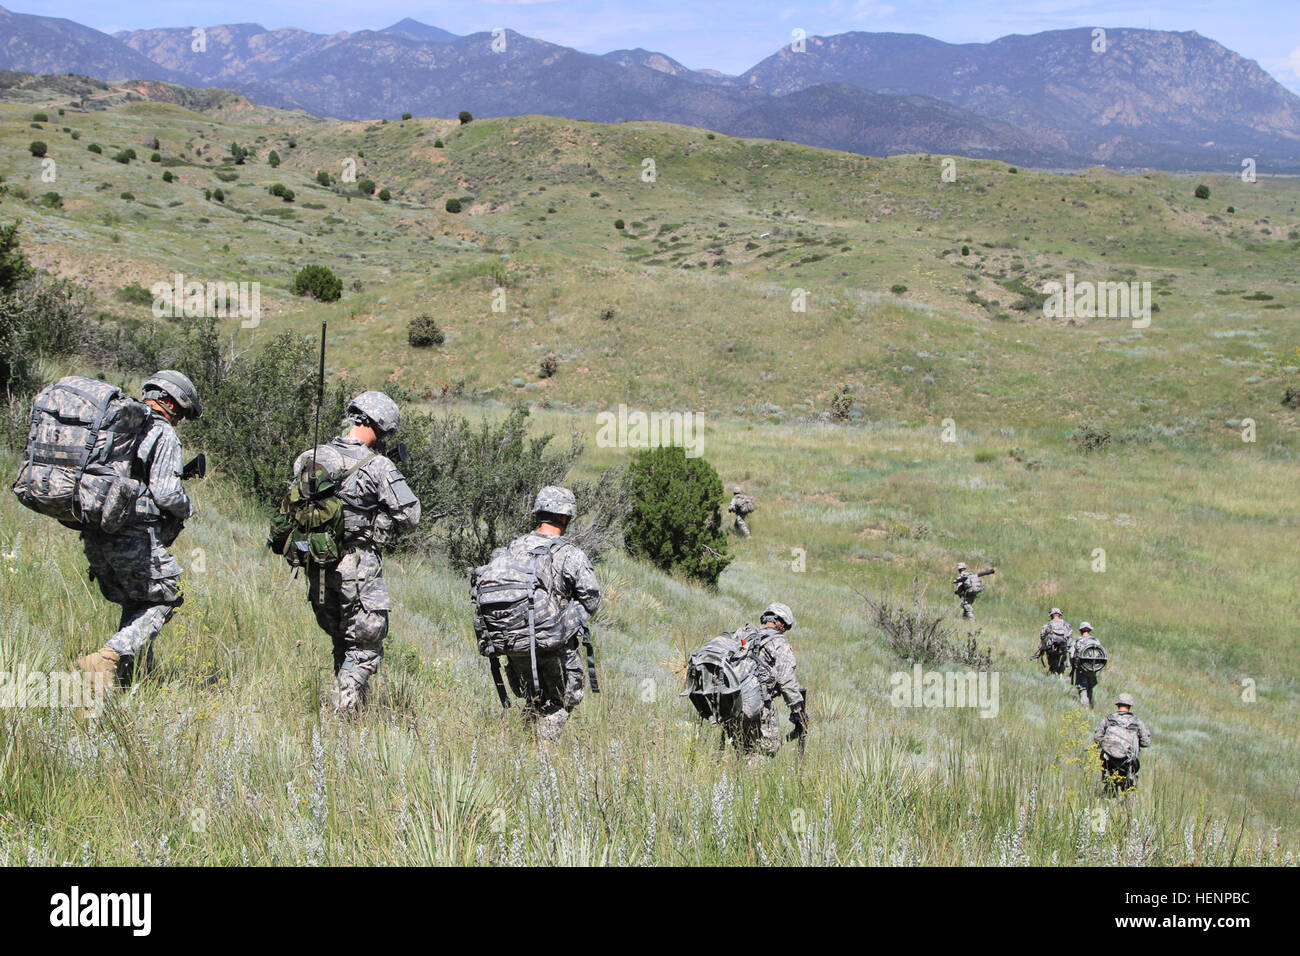 Soldiers of Headquarters and Headquarters Company, 1st Battalion, 38th Infantry Regiment, 1st Stryker Brigade Combat Team, 4th Infantry Division, descend toward a valley during the first of a three-day Mortar Training and Evaluation Program, Aug. 19, 2014. “Each section will occupy a mortar firing position, receive a fire mission and fire different types of fire missions,” said Capt. Kyle Tarvin, commander, Headquarters and Headquarters Company, 1st Battalion, 38th Infantry Regiment, 1st SBCT, 4th Infantry Division. 1-38 air assault mortar teams 140819-A-FE868-012 Stock Photo